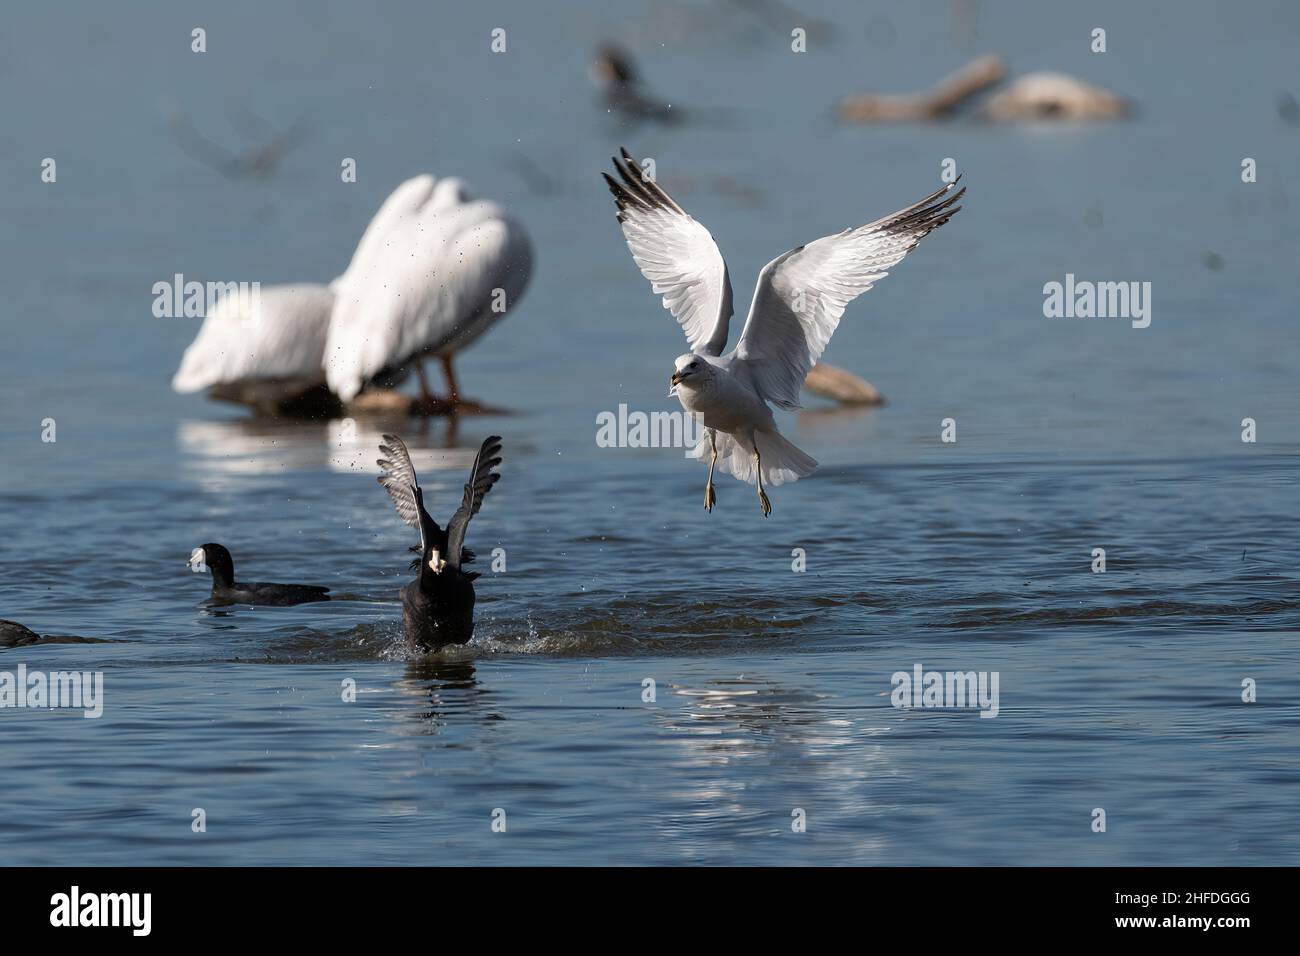 A Ring-billed Gull flying after an American Coot as it chases and harasses the smaller bird on White Rock Lake in Dallas, Texas. Stock Photo